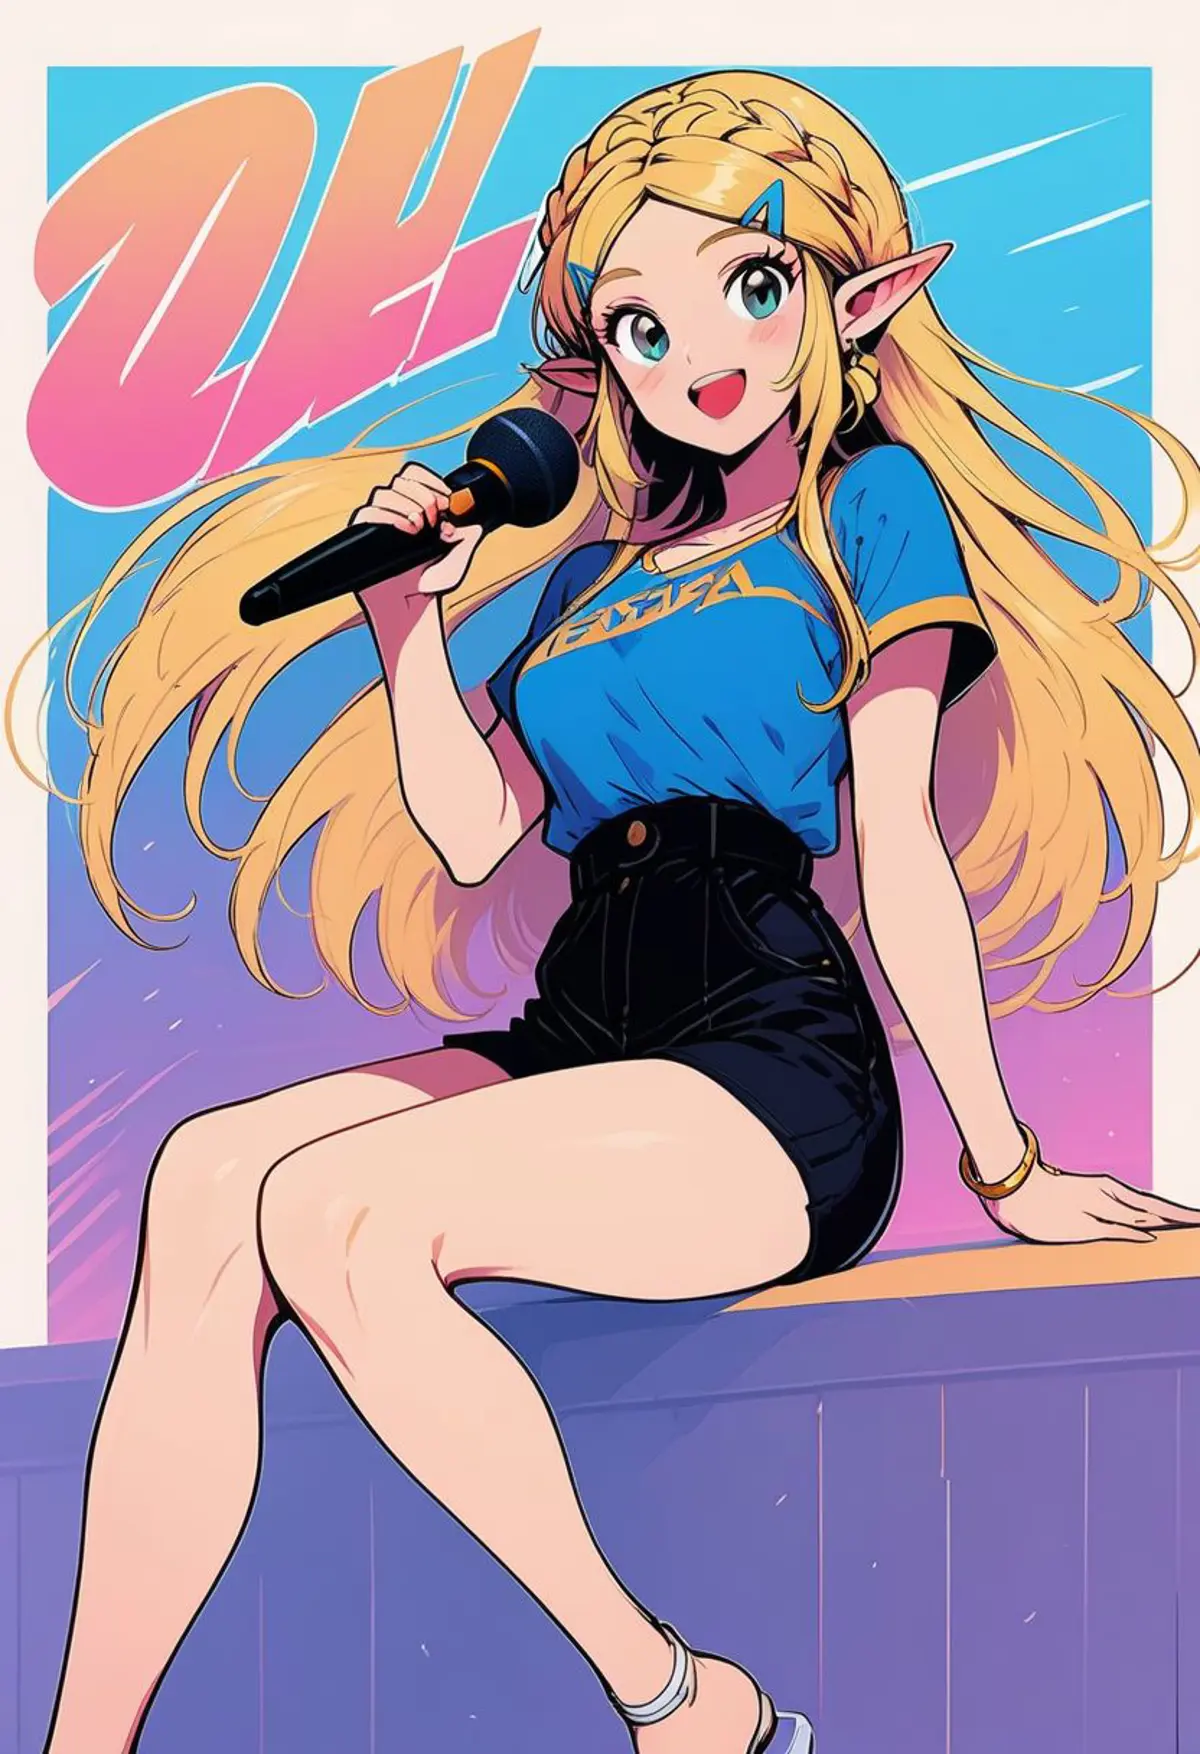 A young woman with pointed ears and blonde hair. She dressed in a blue top and black shorts, holding a microphone seated on what appears to be a stage, bathed in pink hues that add a vibrant and energetic mood to the scene. 